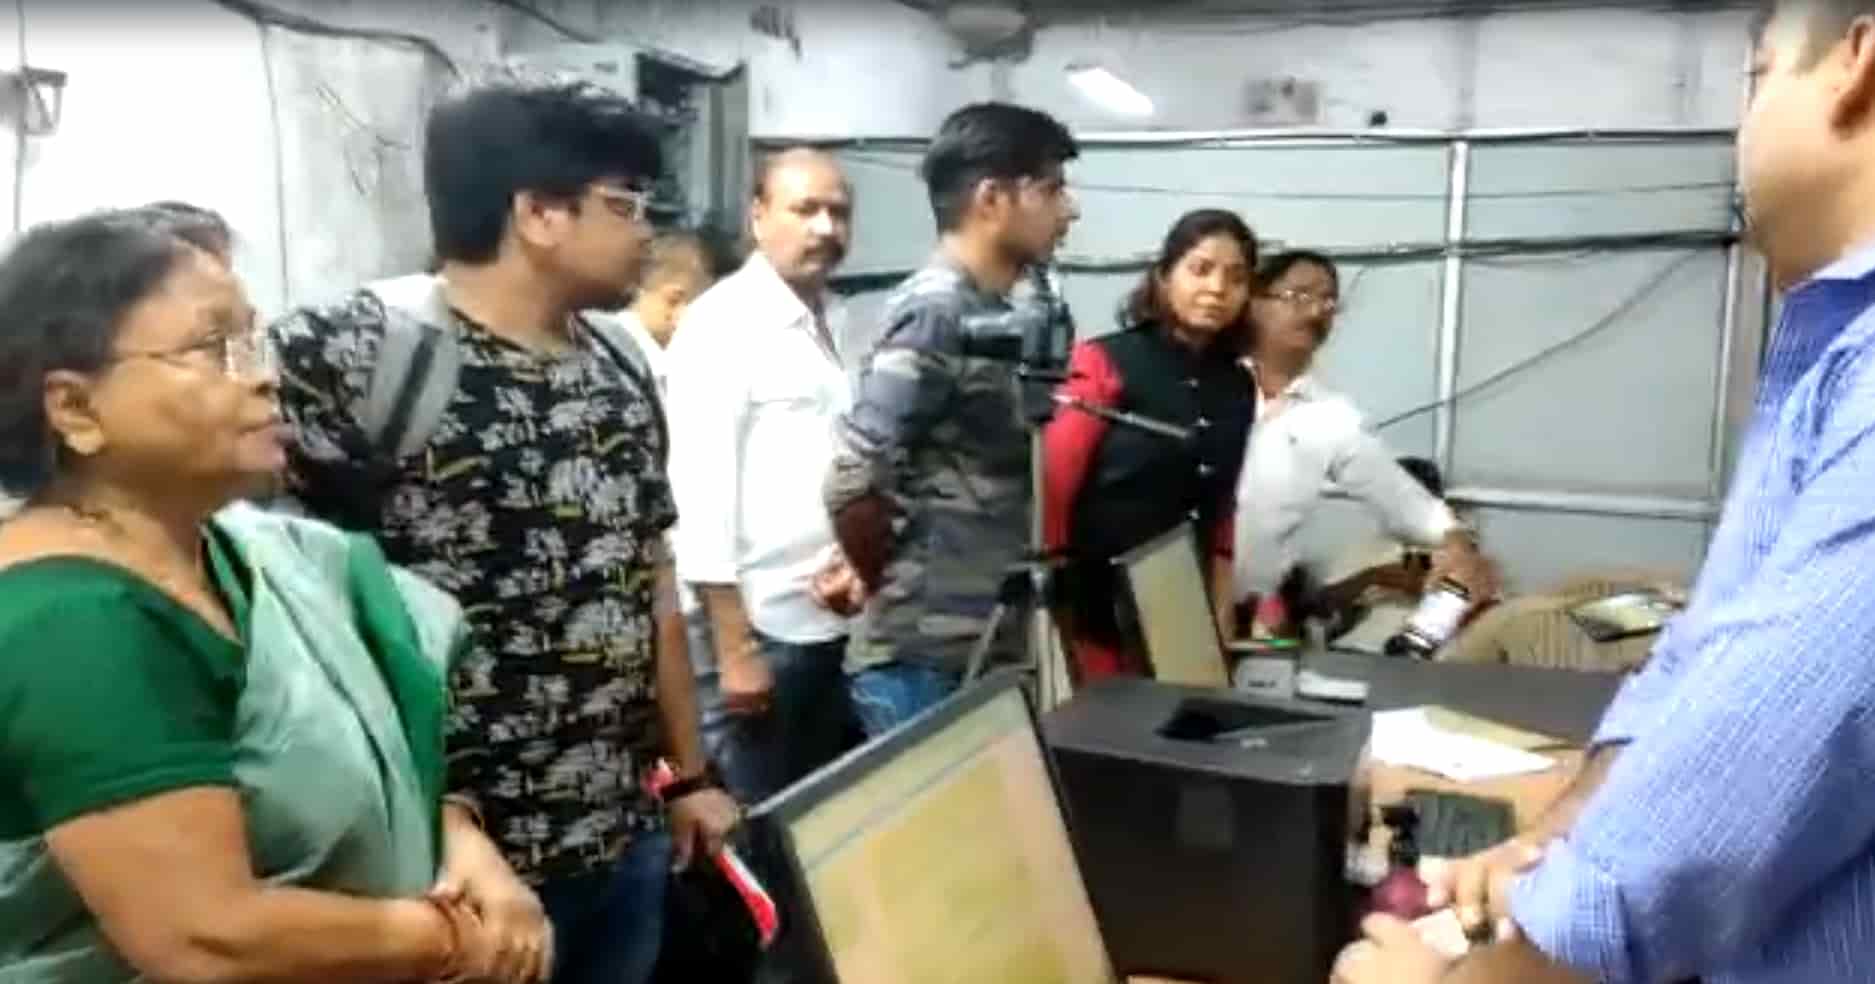 Ranchi Regional Passport Officer Manita K. promises an expedited police verification process for passports, aiming to reduce the waiting time to a week.